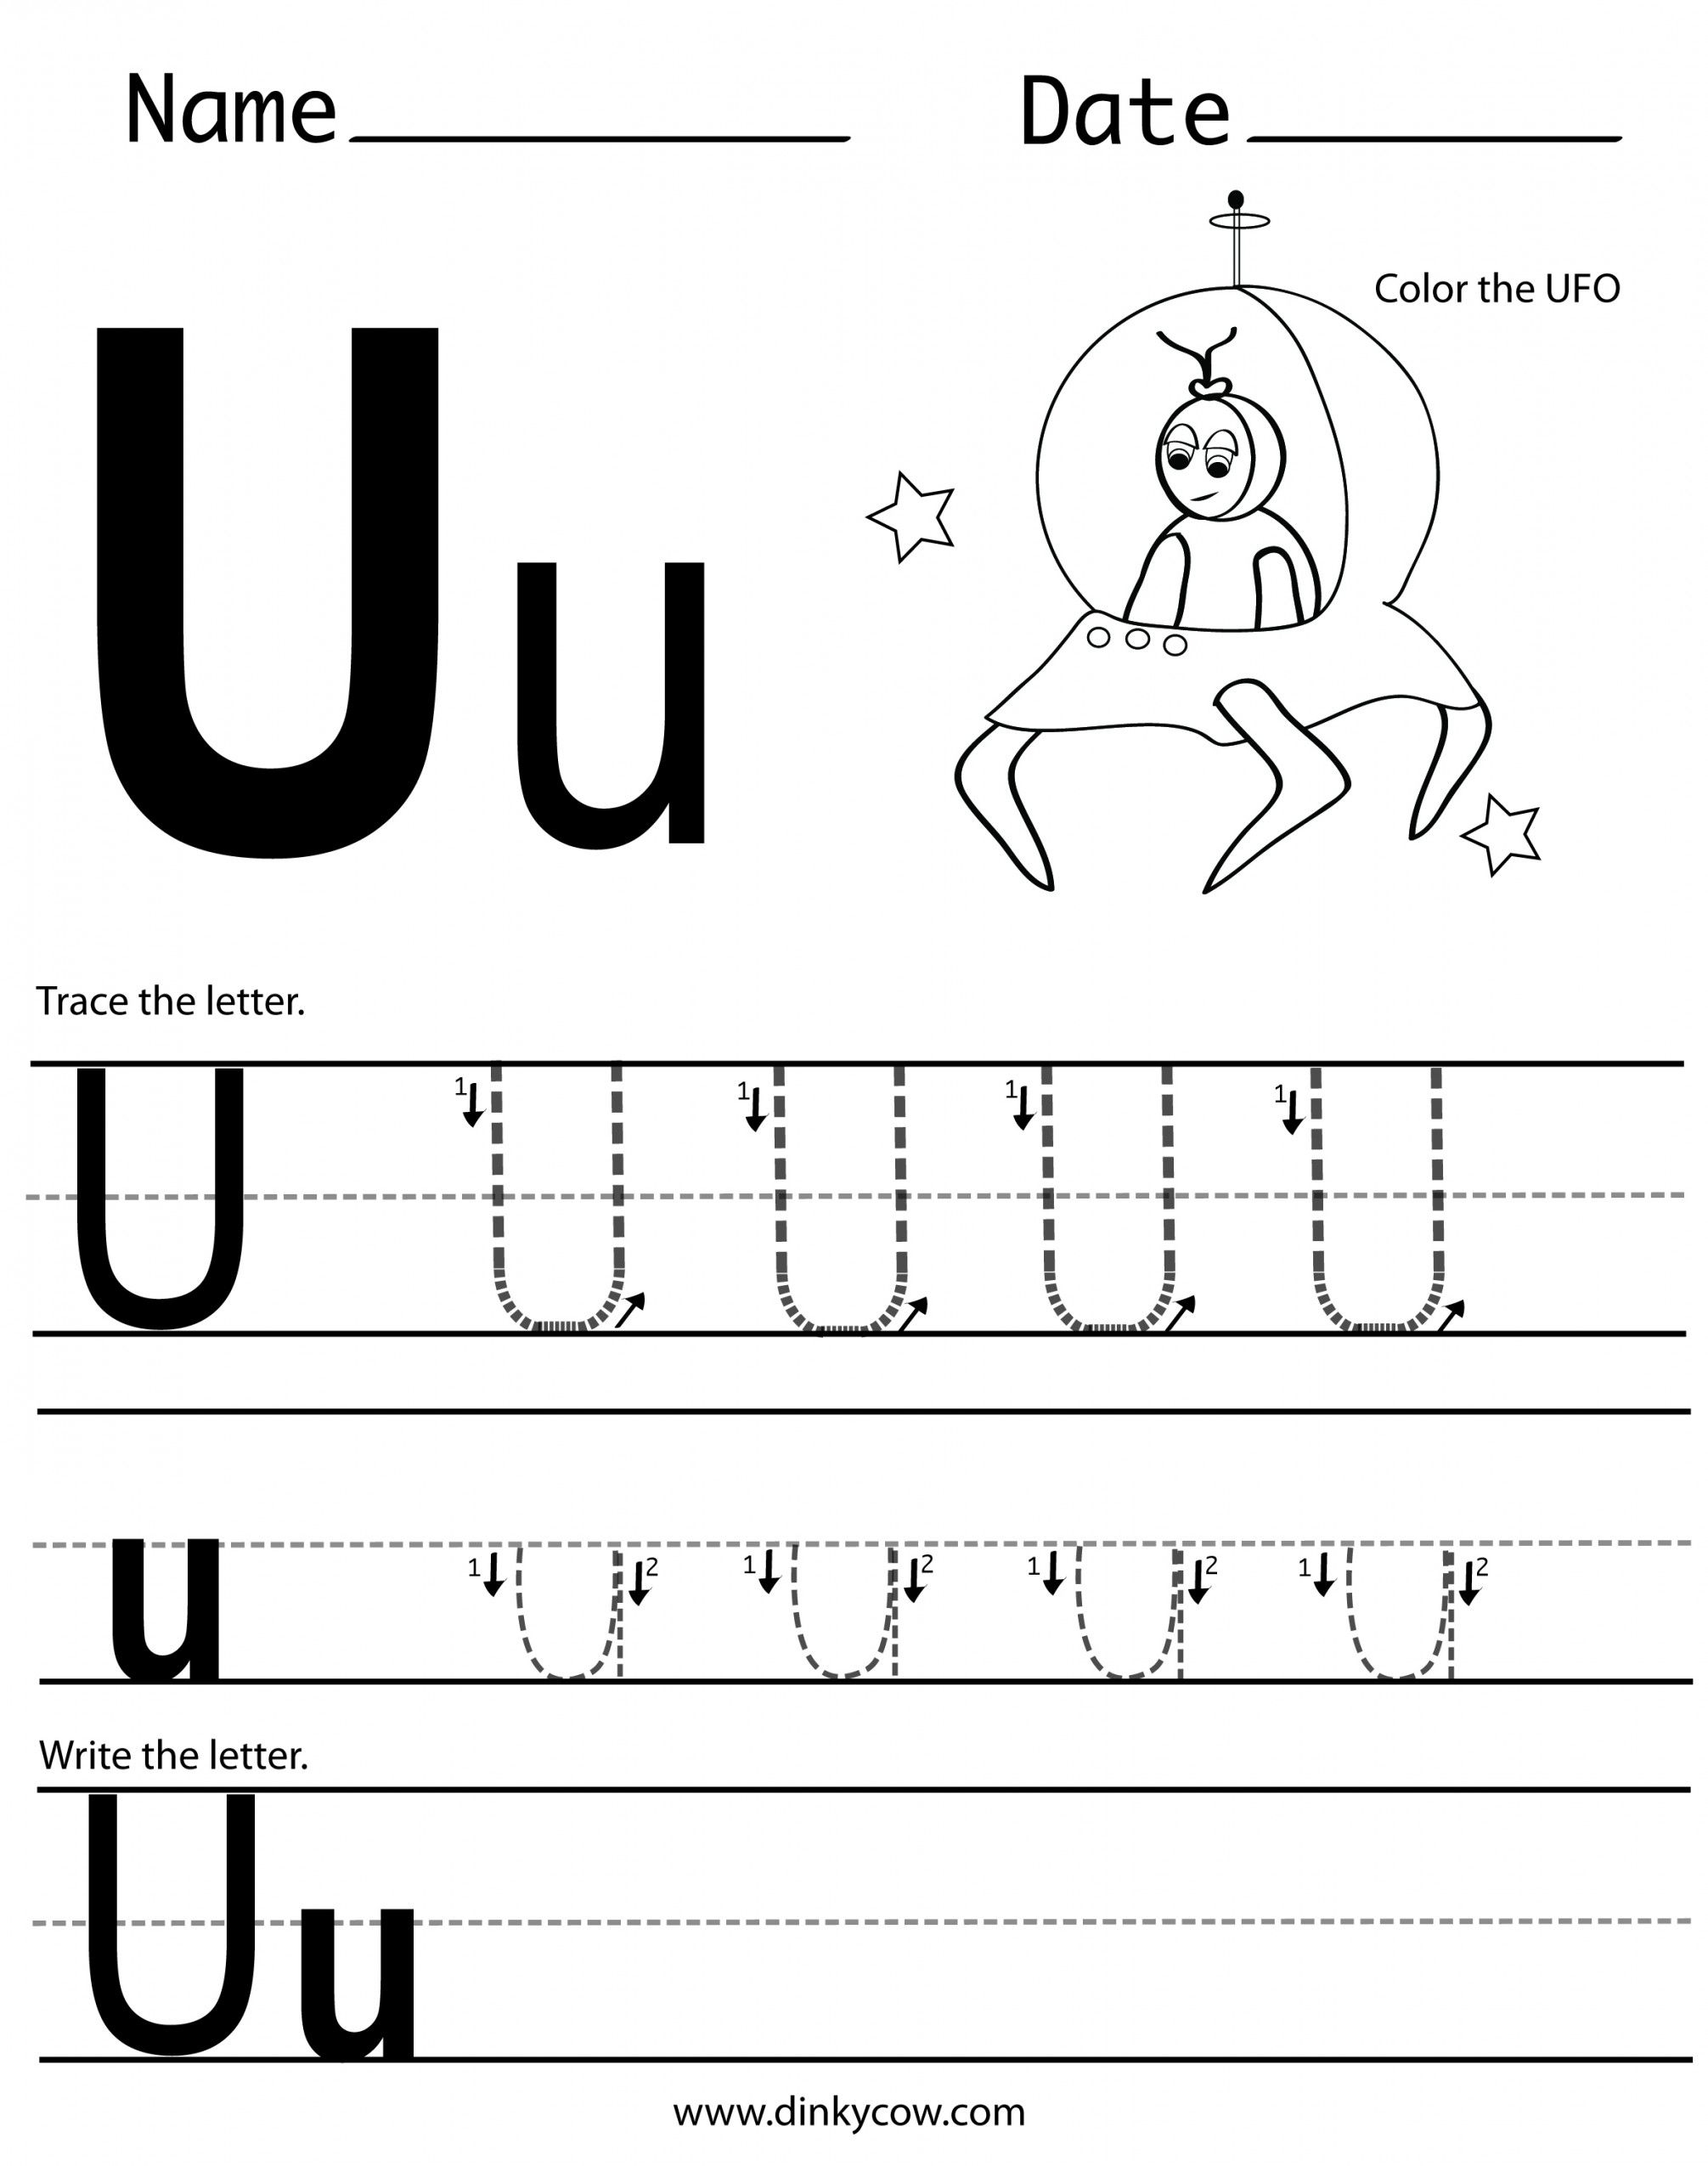 12 Letter U Worksheets For Young Learners | Kittybabylove in Letter U Tracing Paper